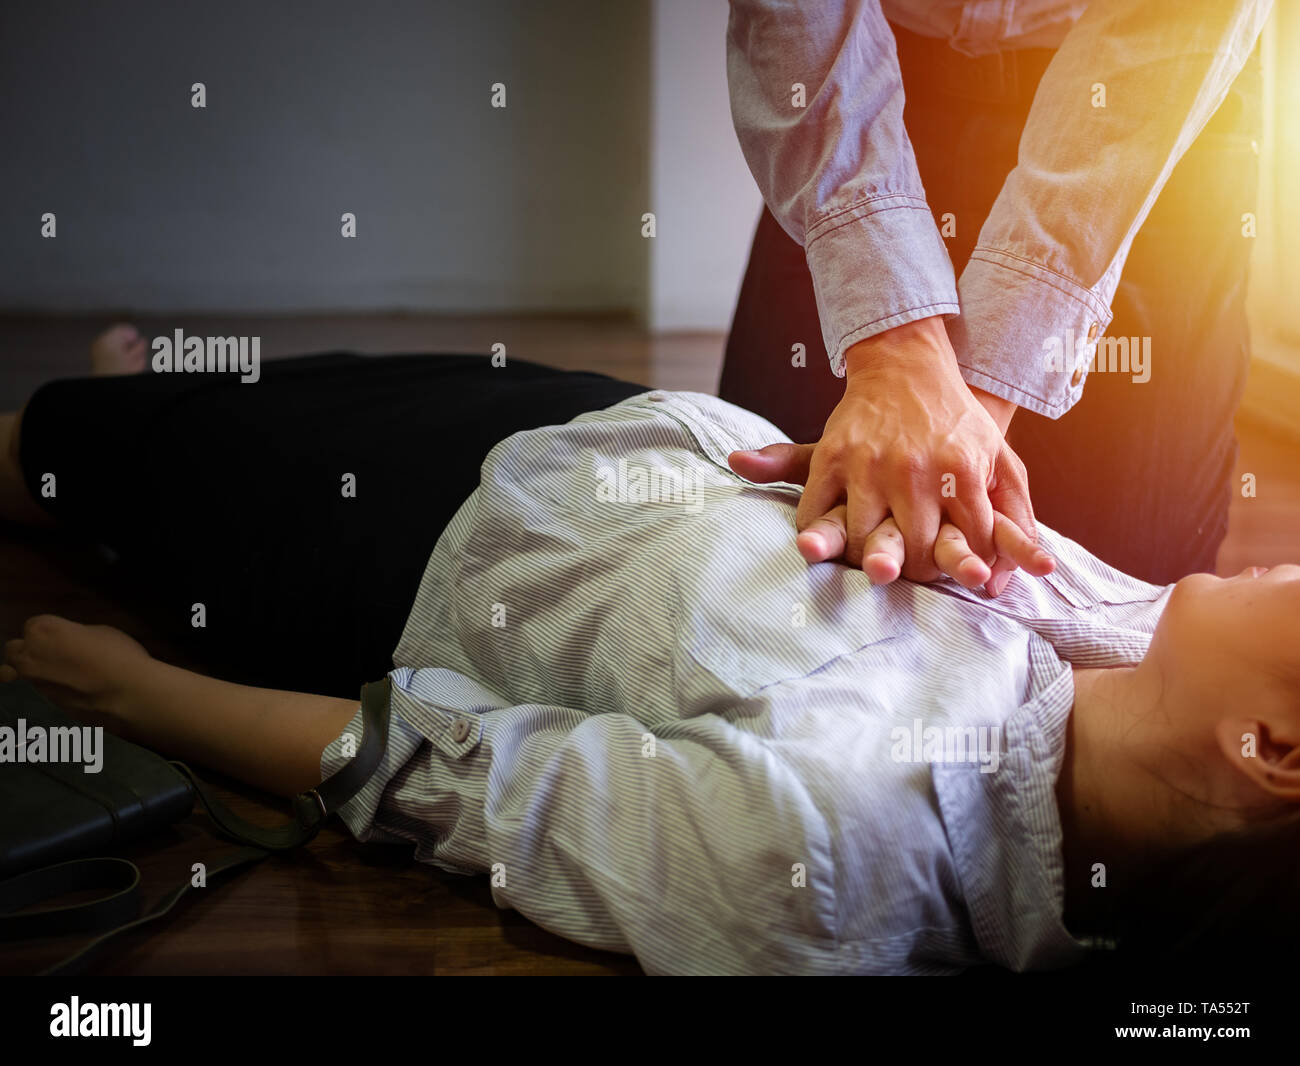 volunteer office man use hand pump on chest for first aid emergency CPR on heart attack woman unconscious, try to resuscitation patient woman at work Stock Photo